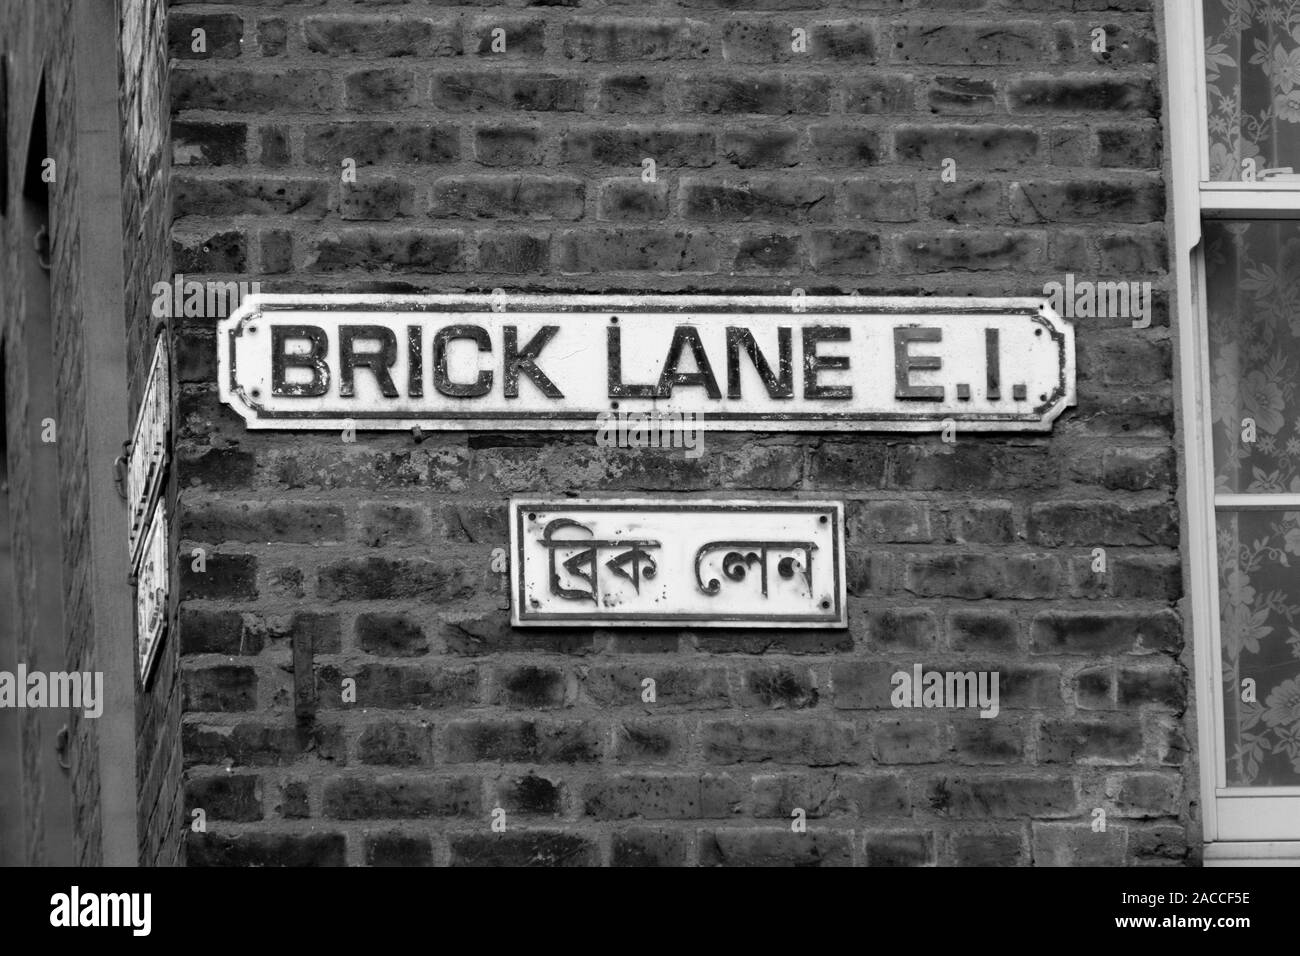 The famous Brick Lane street in the East End of London, England. The lane is also known as Banglatown and is a centre for the Bangladeshi community. Stock Photo